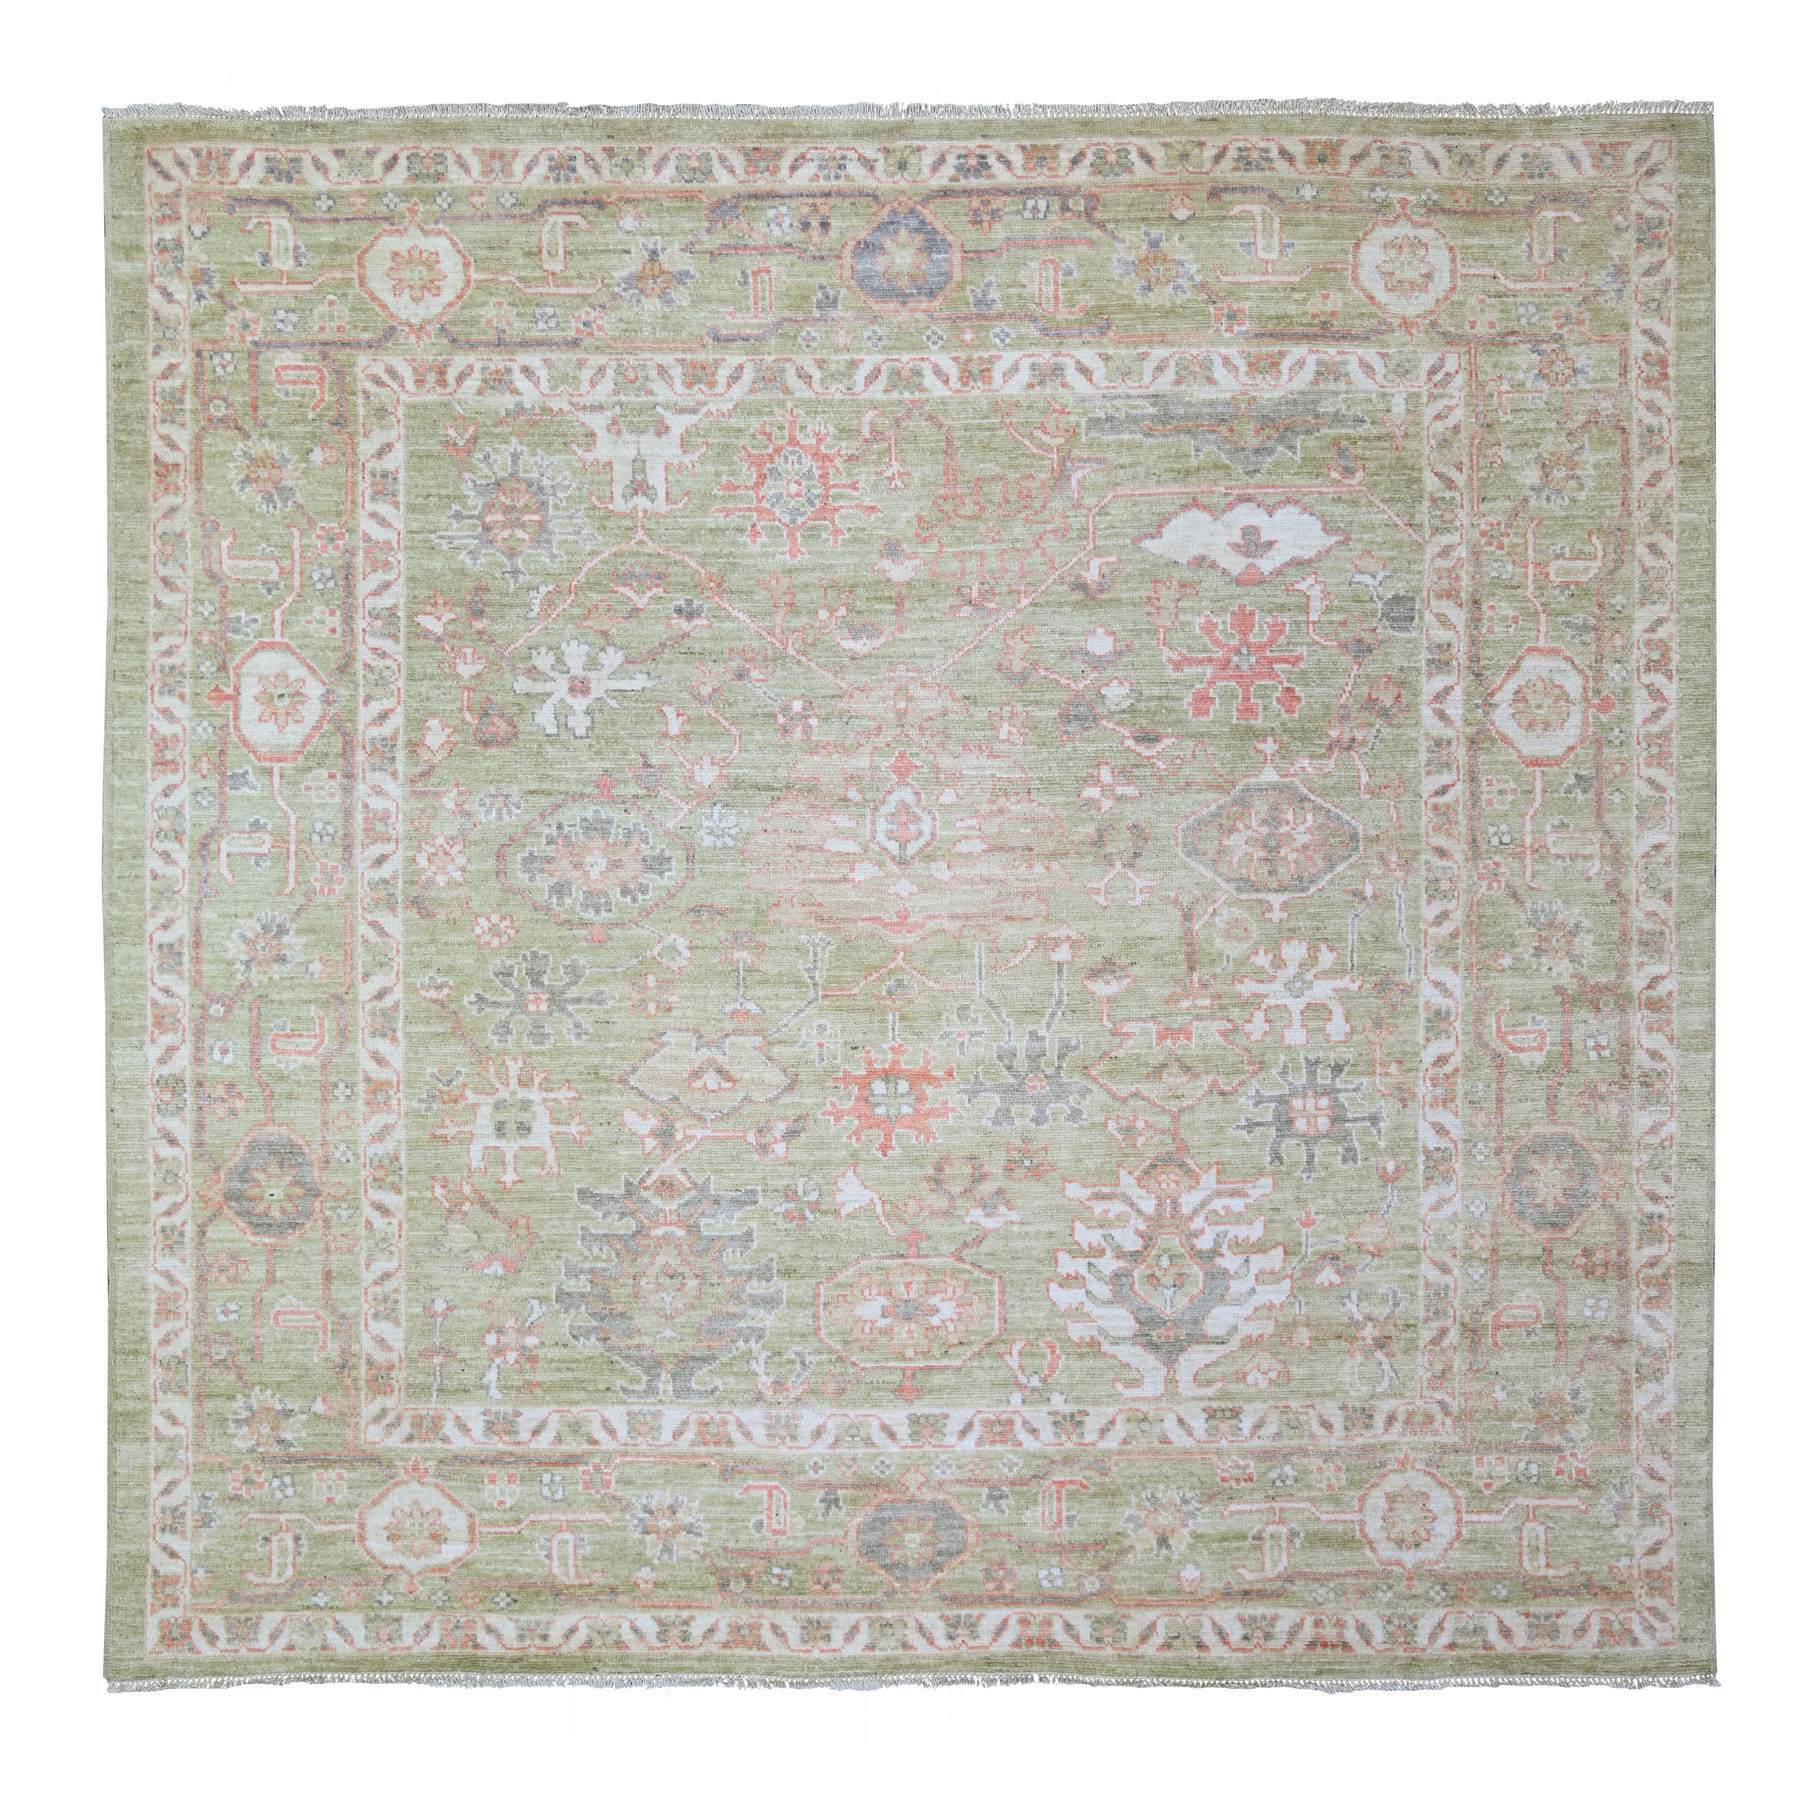 8'1"x8'1" Artichoke Green, Afghan Angora Oushak with Soft Colors Vegetable Dyes, Extra Soft Wool Hand Woven, Square Oriental Rug 